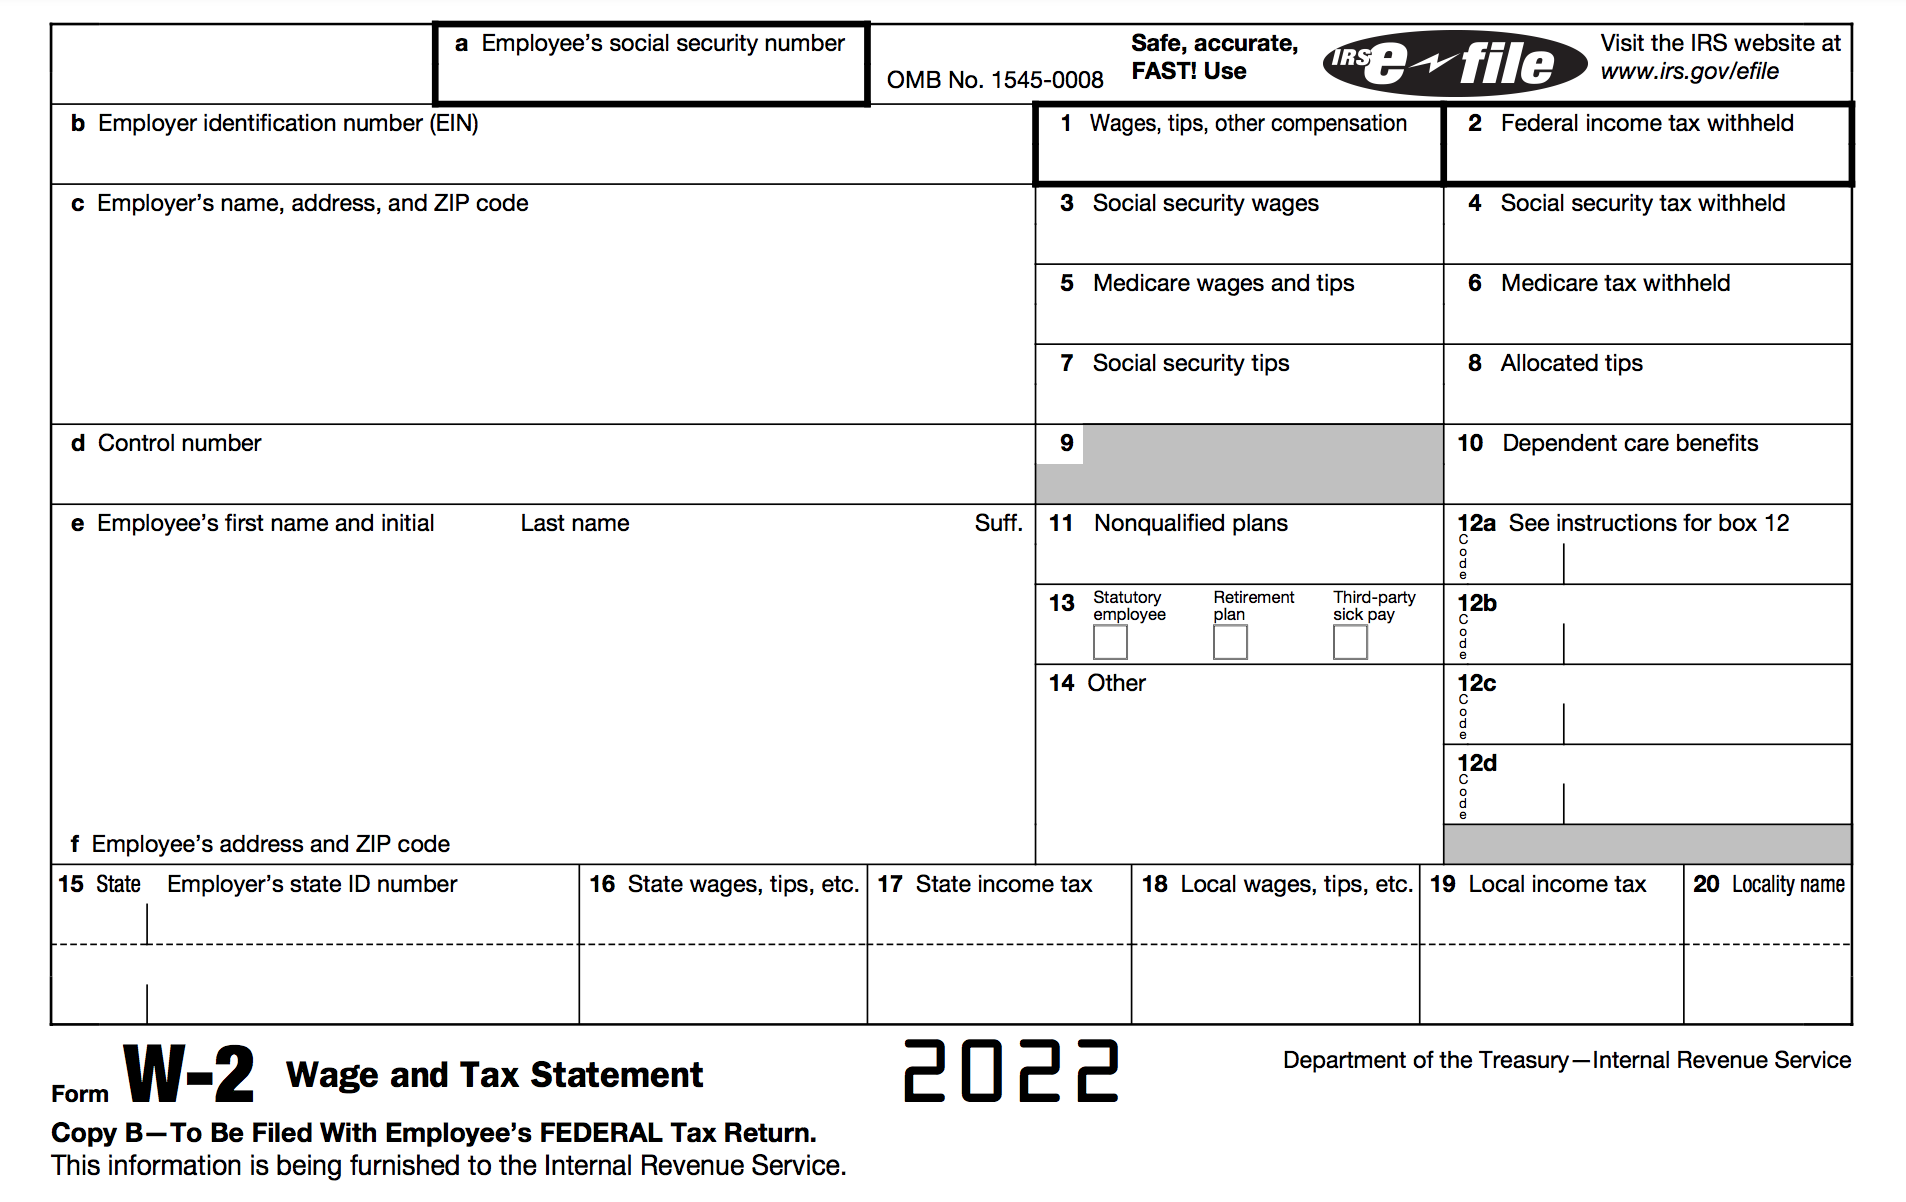 How To Fill Out A W-2 Tax Form | Smartasset within Filling Out W2 Forms